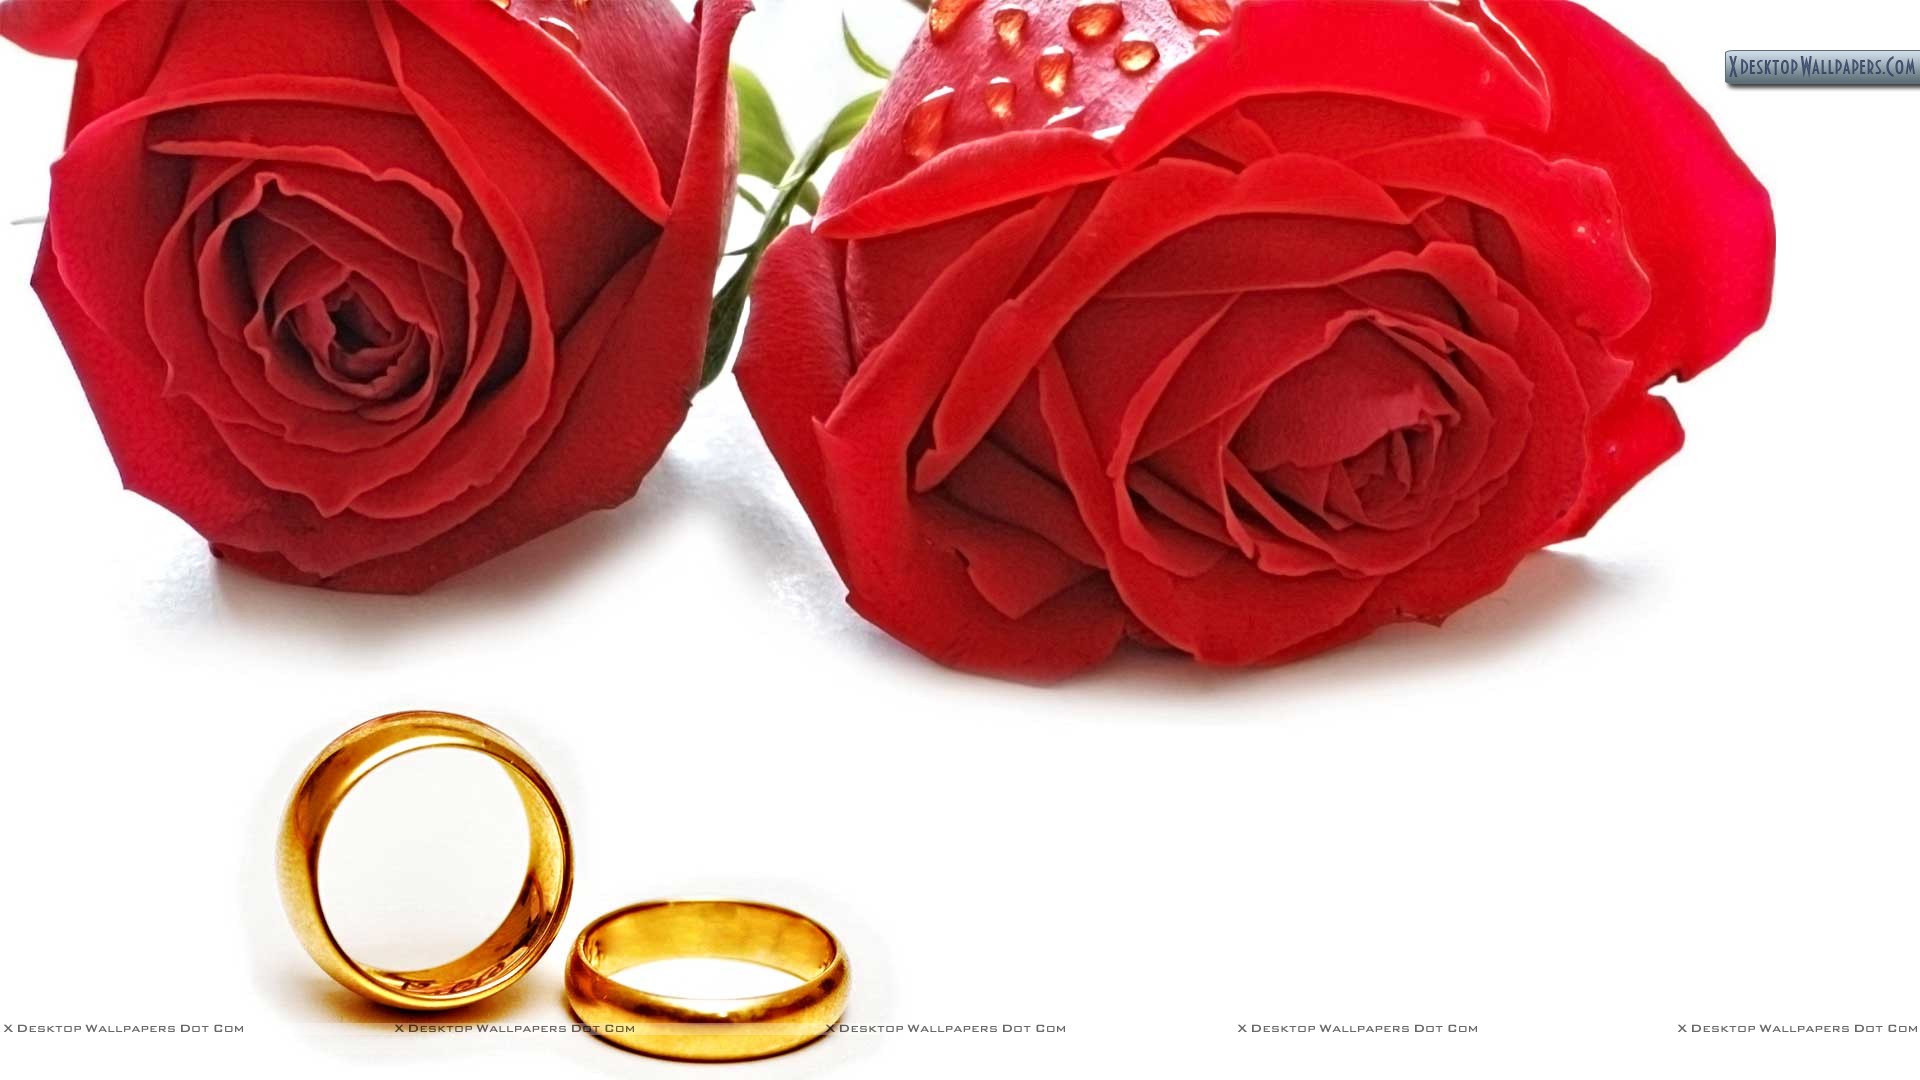 Red Roses And Wedding Rings - HD Wallpaper 